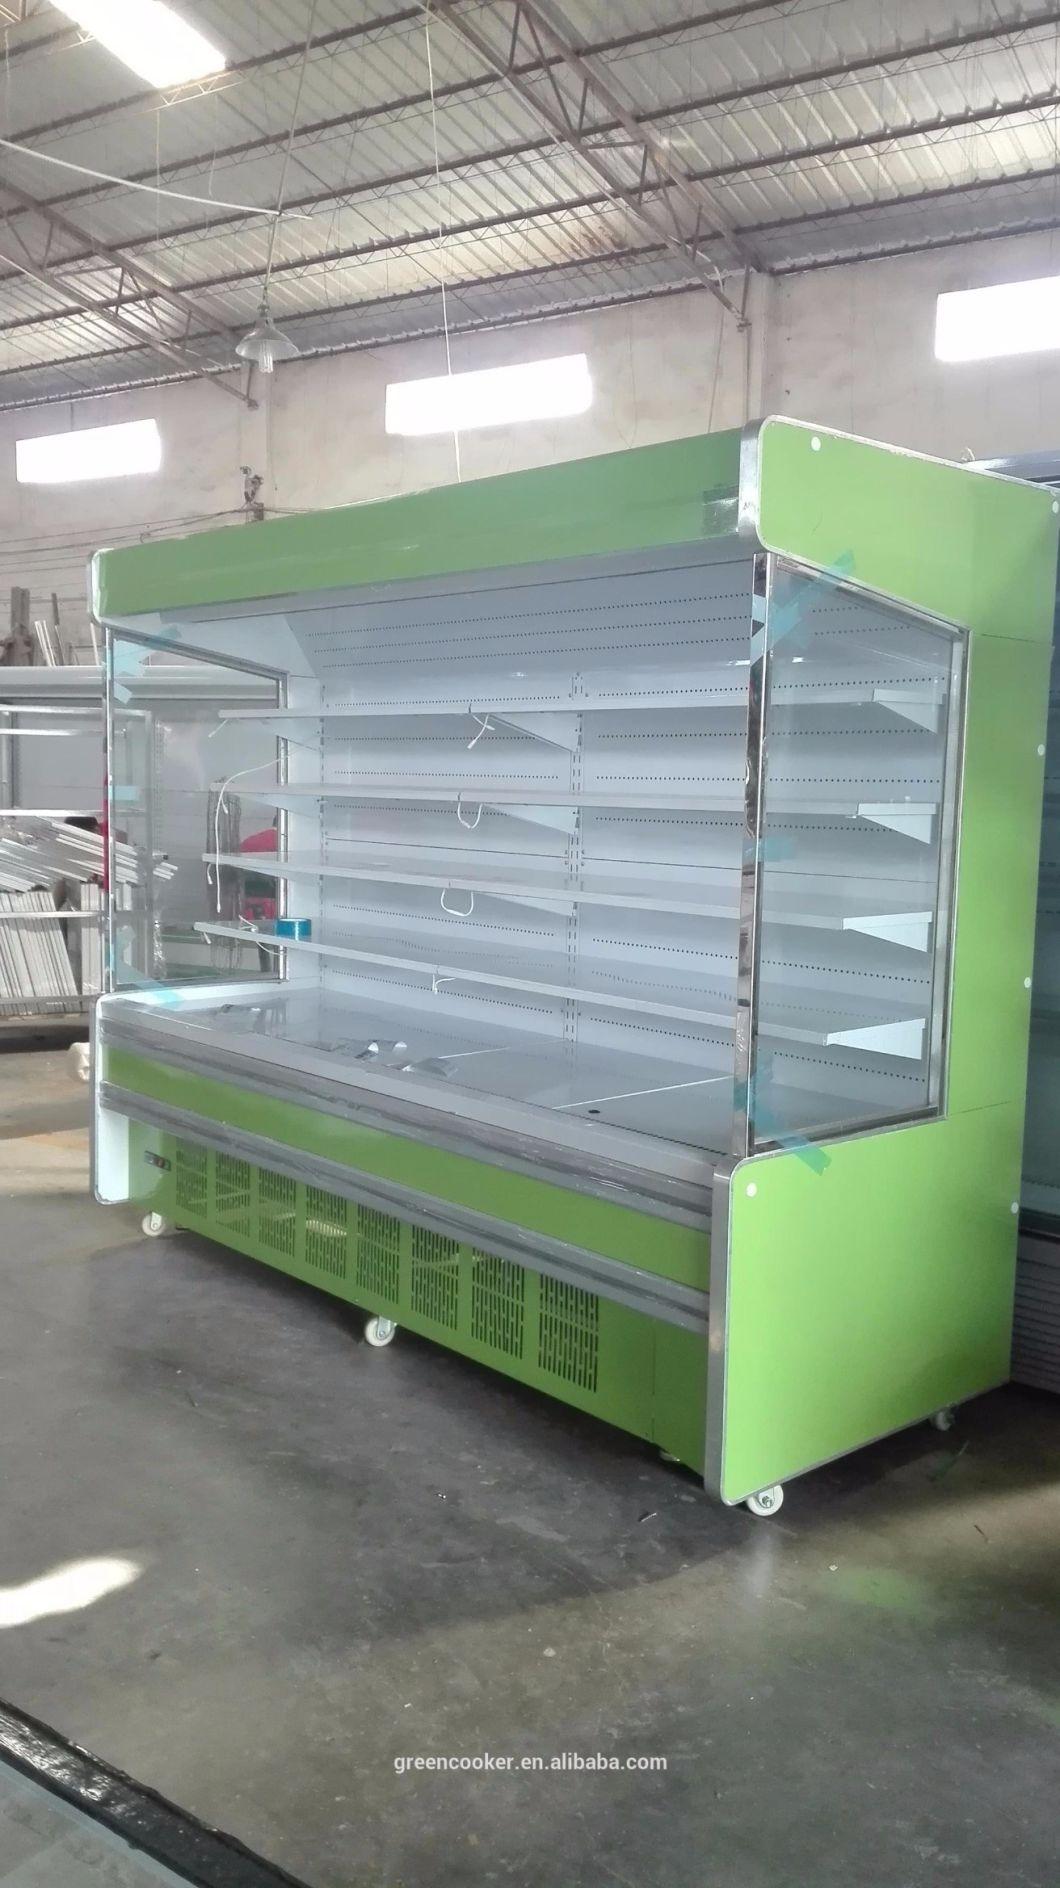 Display Beverages and Fruits Perspective Glass Open Shelf Cooler Commercial Refrigerator